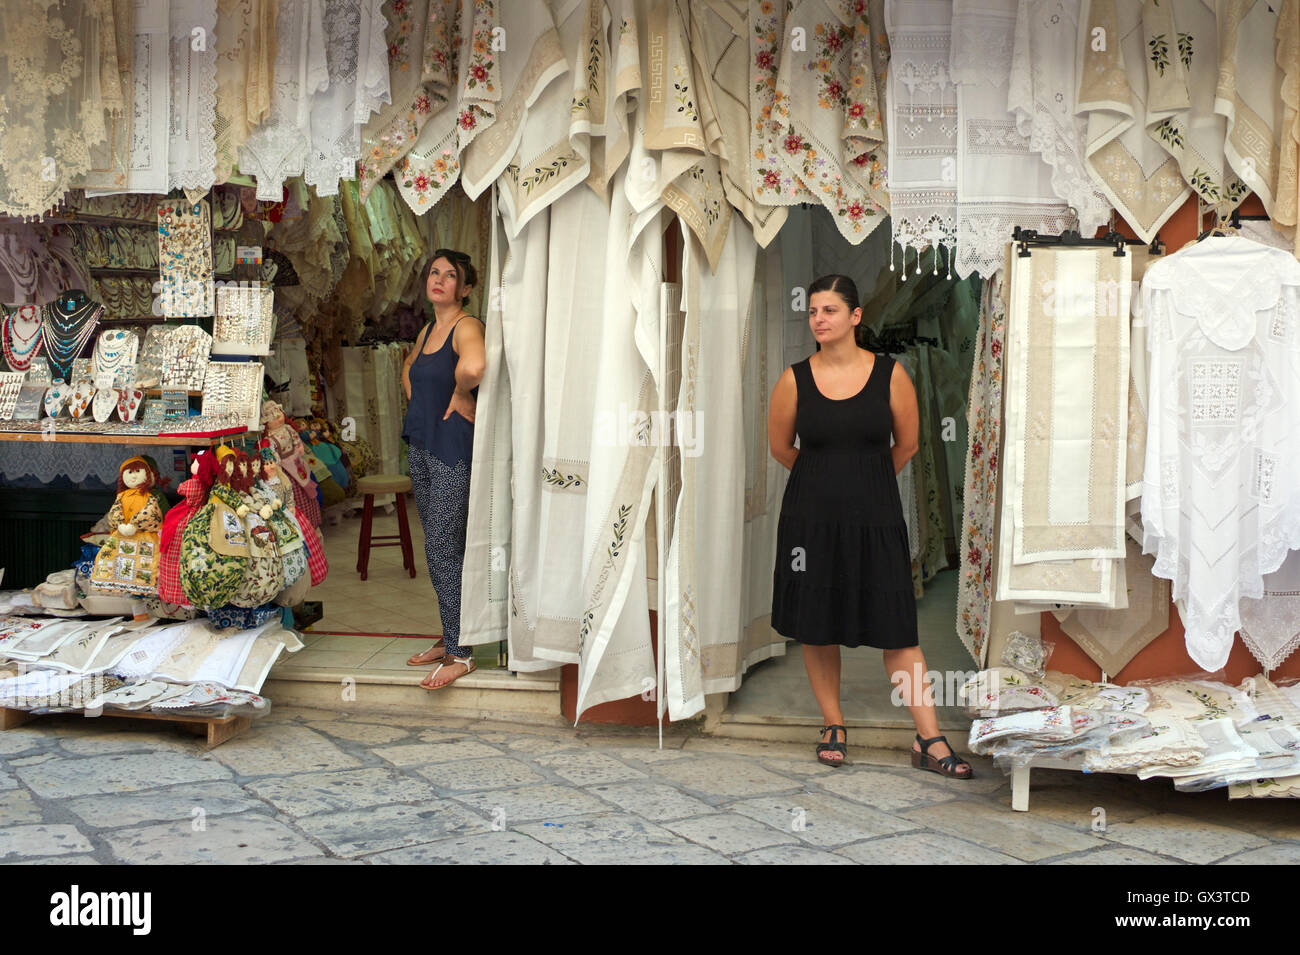 Lace shops with female shopkeepers waiting for trade Corfu Old Town Ionian Islands Greece Stock Photo